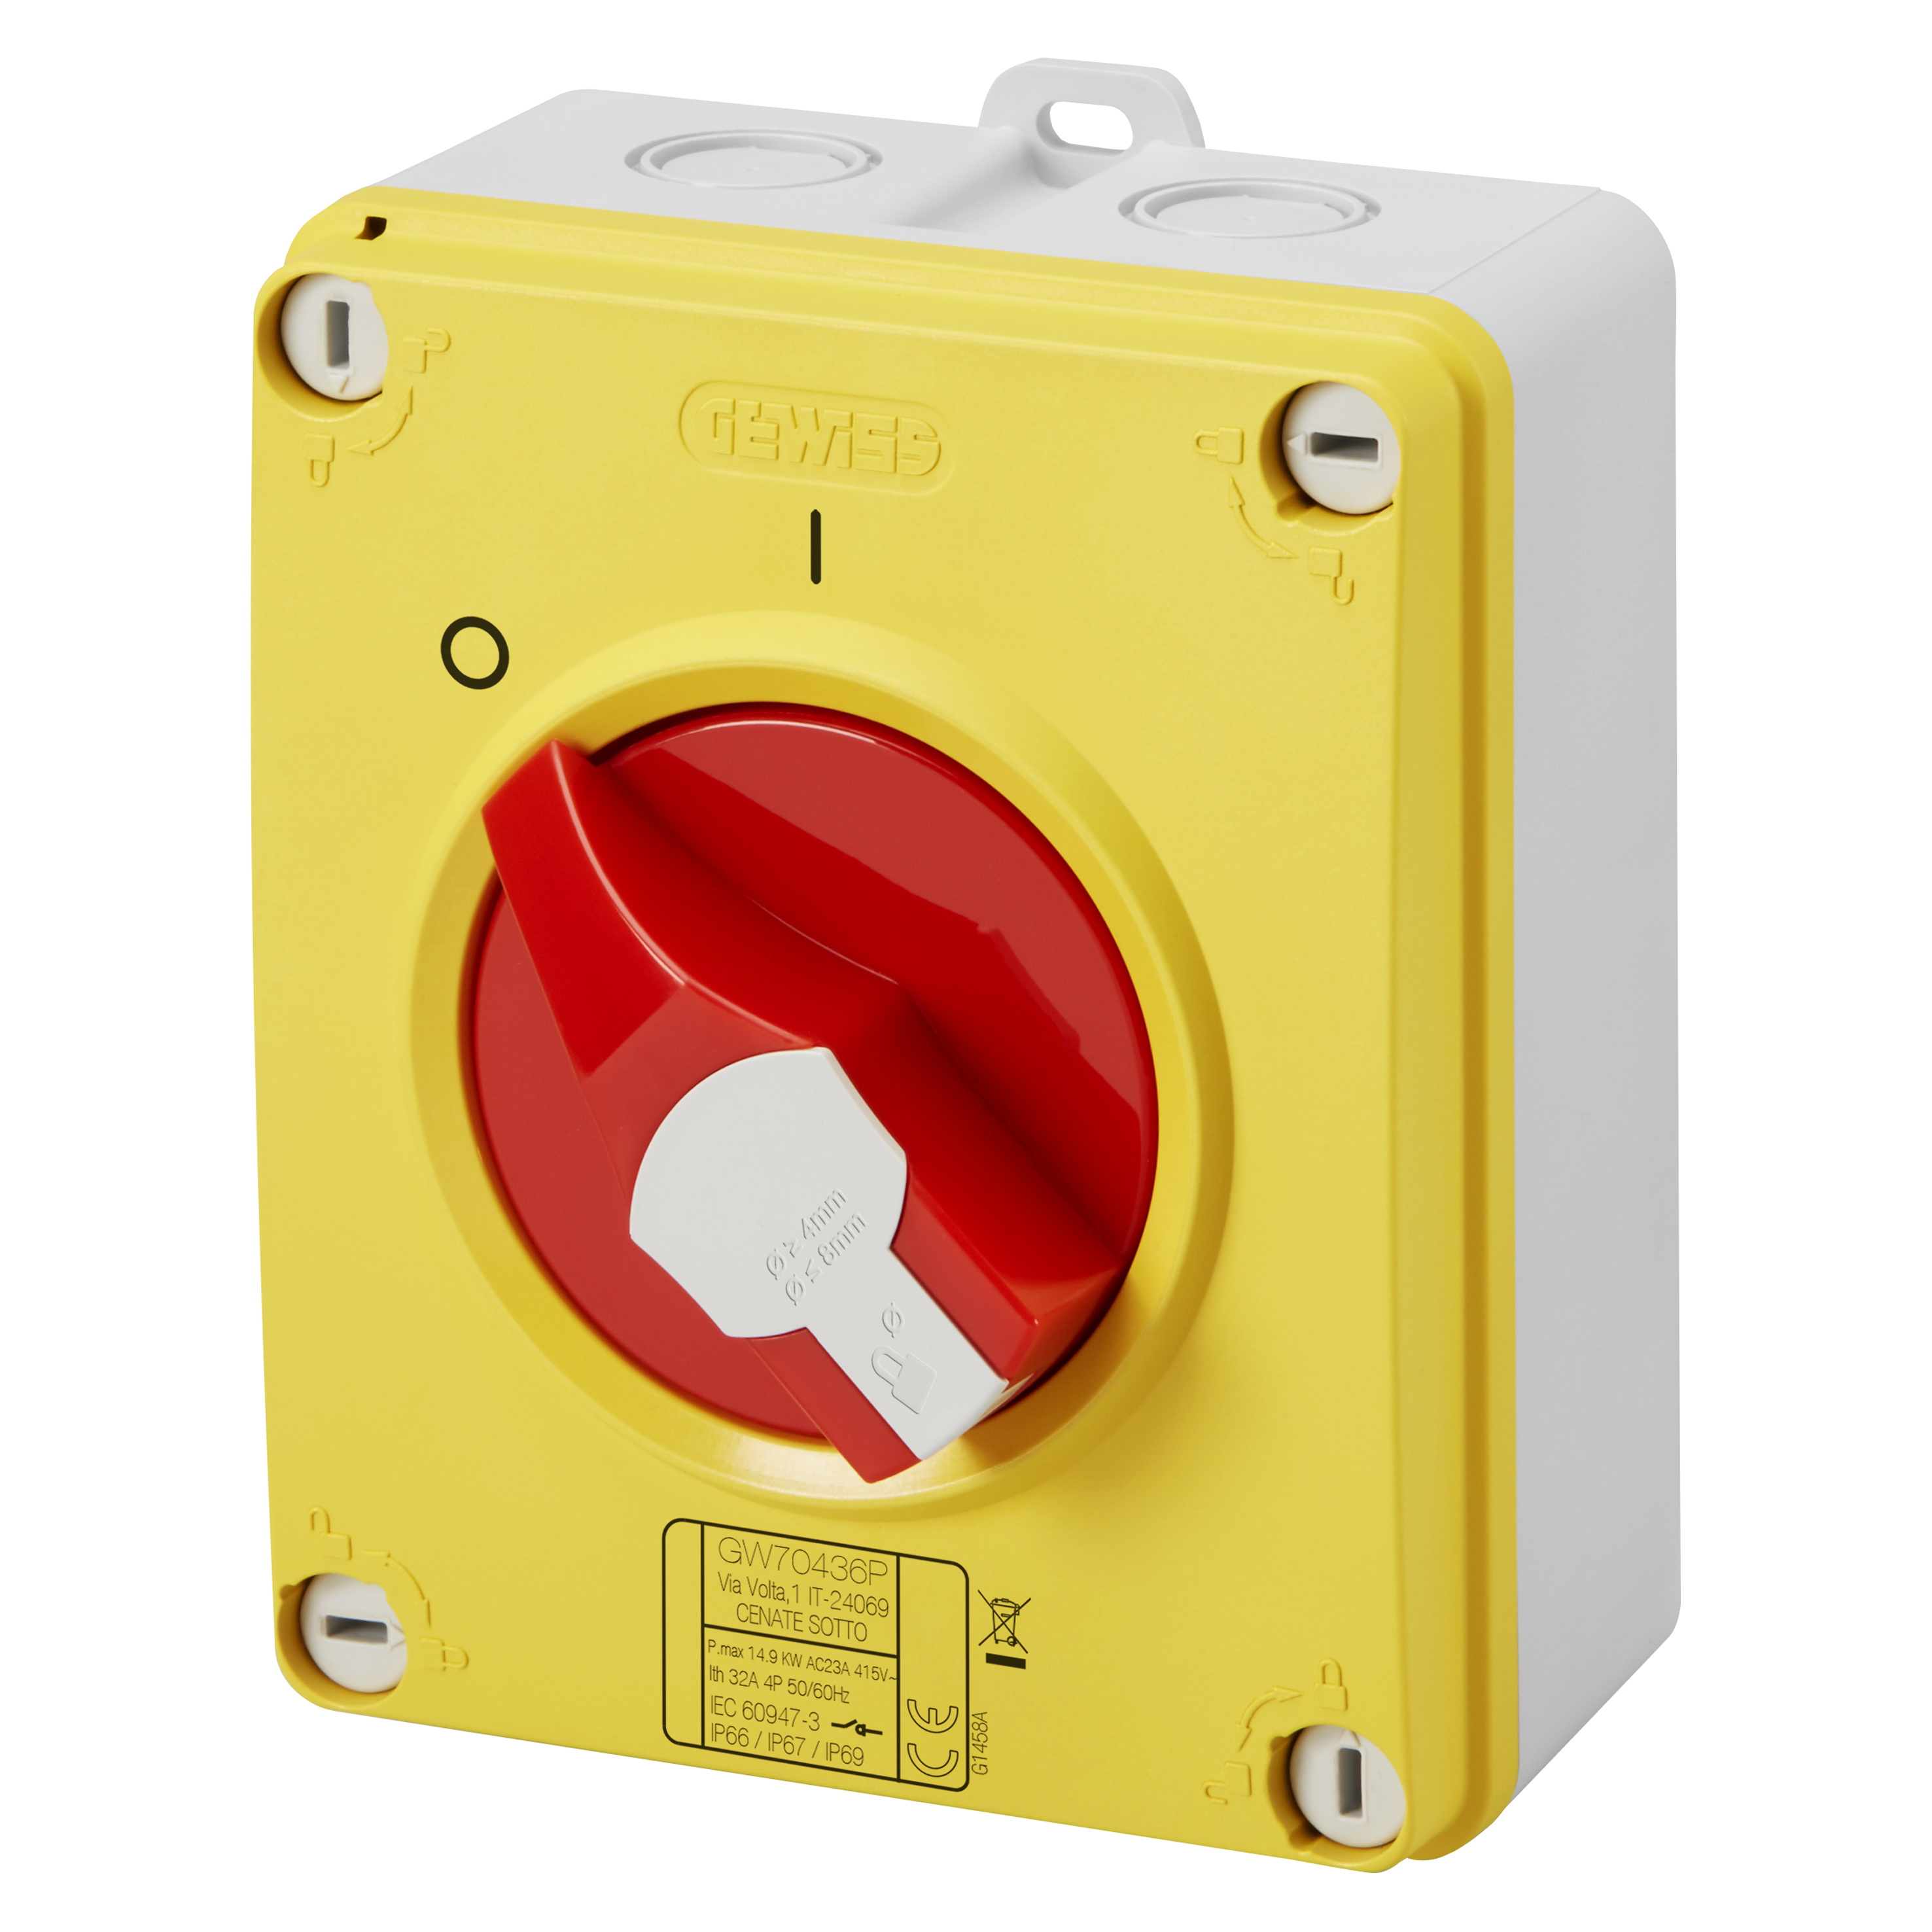 Enclosed Rotary 4 pole  Isolator lockable 32A IP65 63A or 100A inc vat